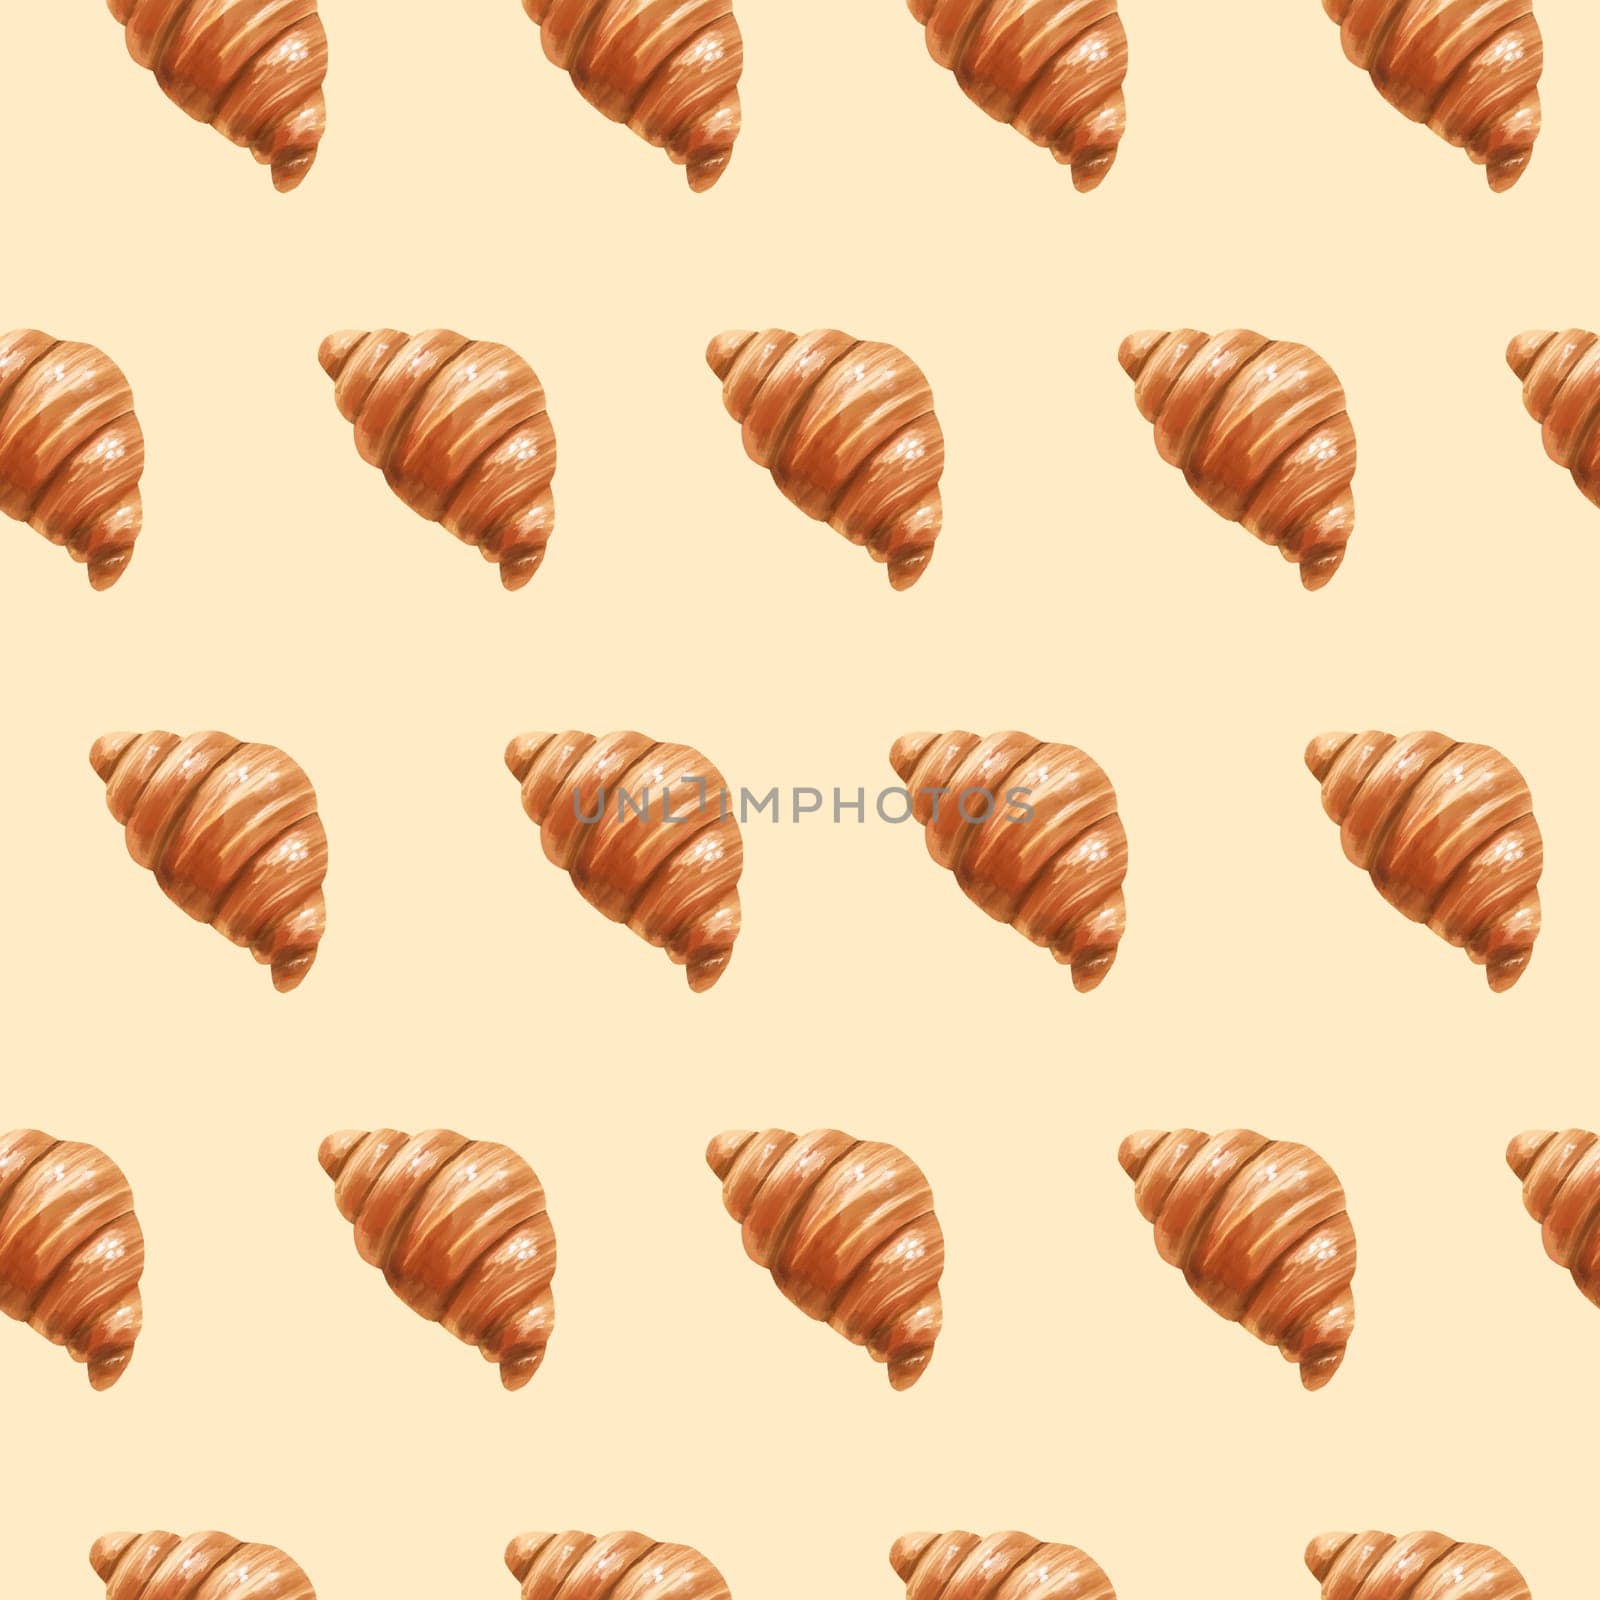 Seamless pattern with baking. Hand drawn illustrations of sweet pastries croissants